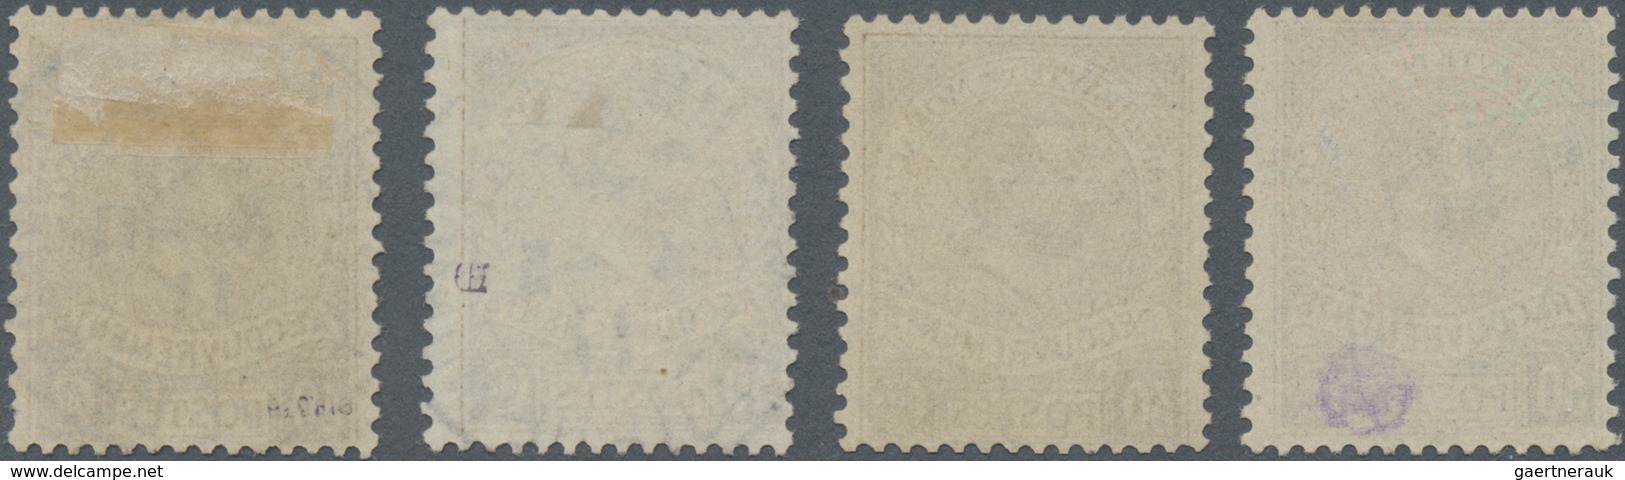 Monaco - Portomarken: 1911, Postage Due 30c. Pale Brown Small Group With Four Fine Used Copies Of Th - Postage Due